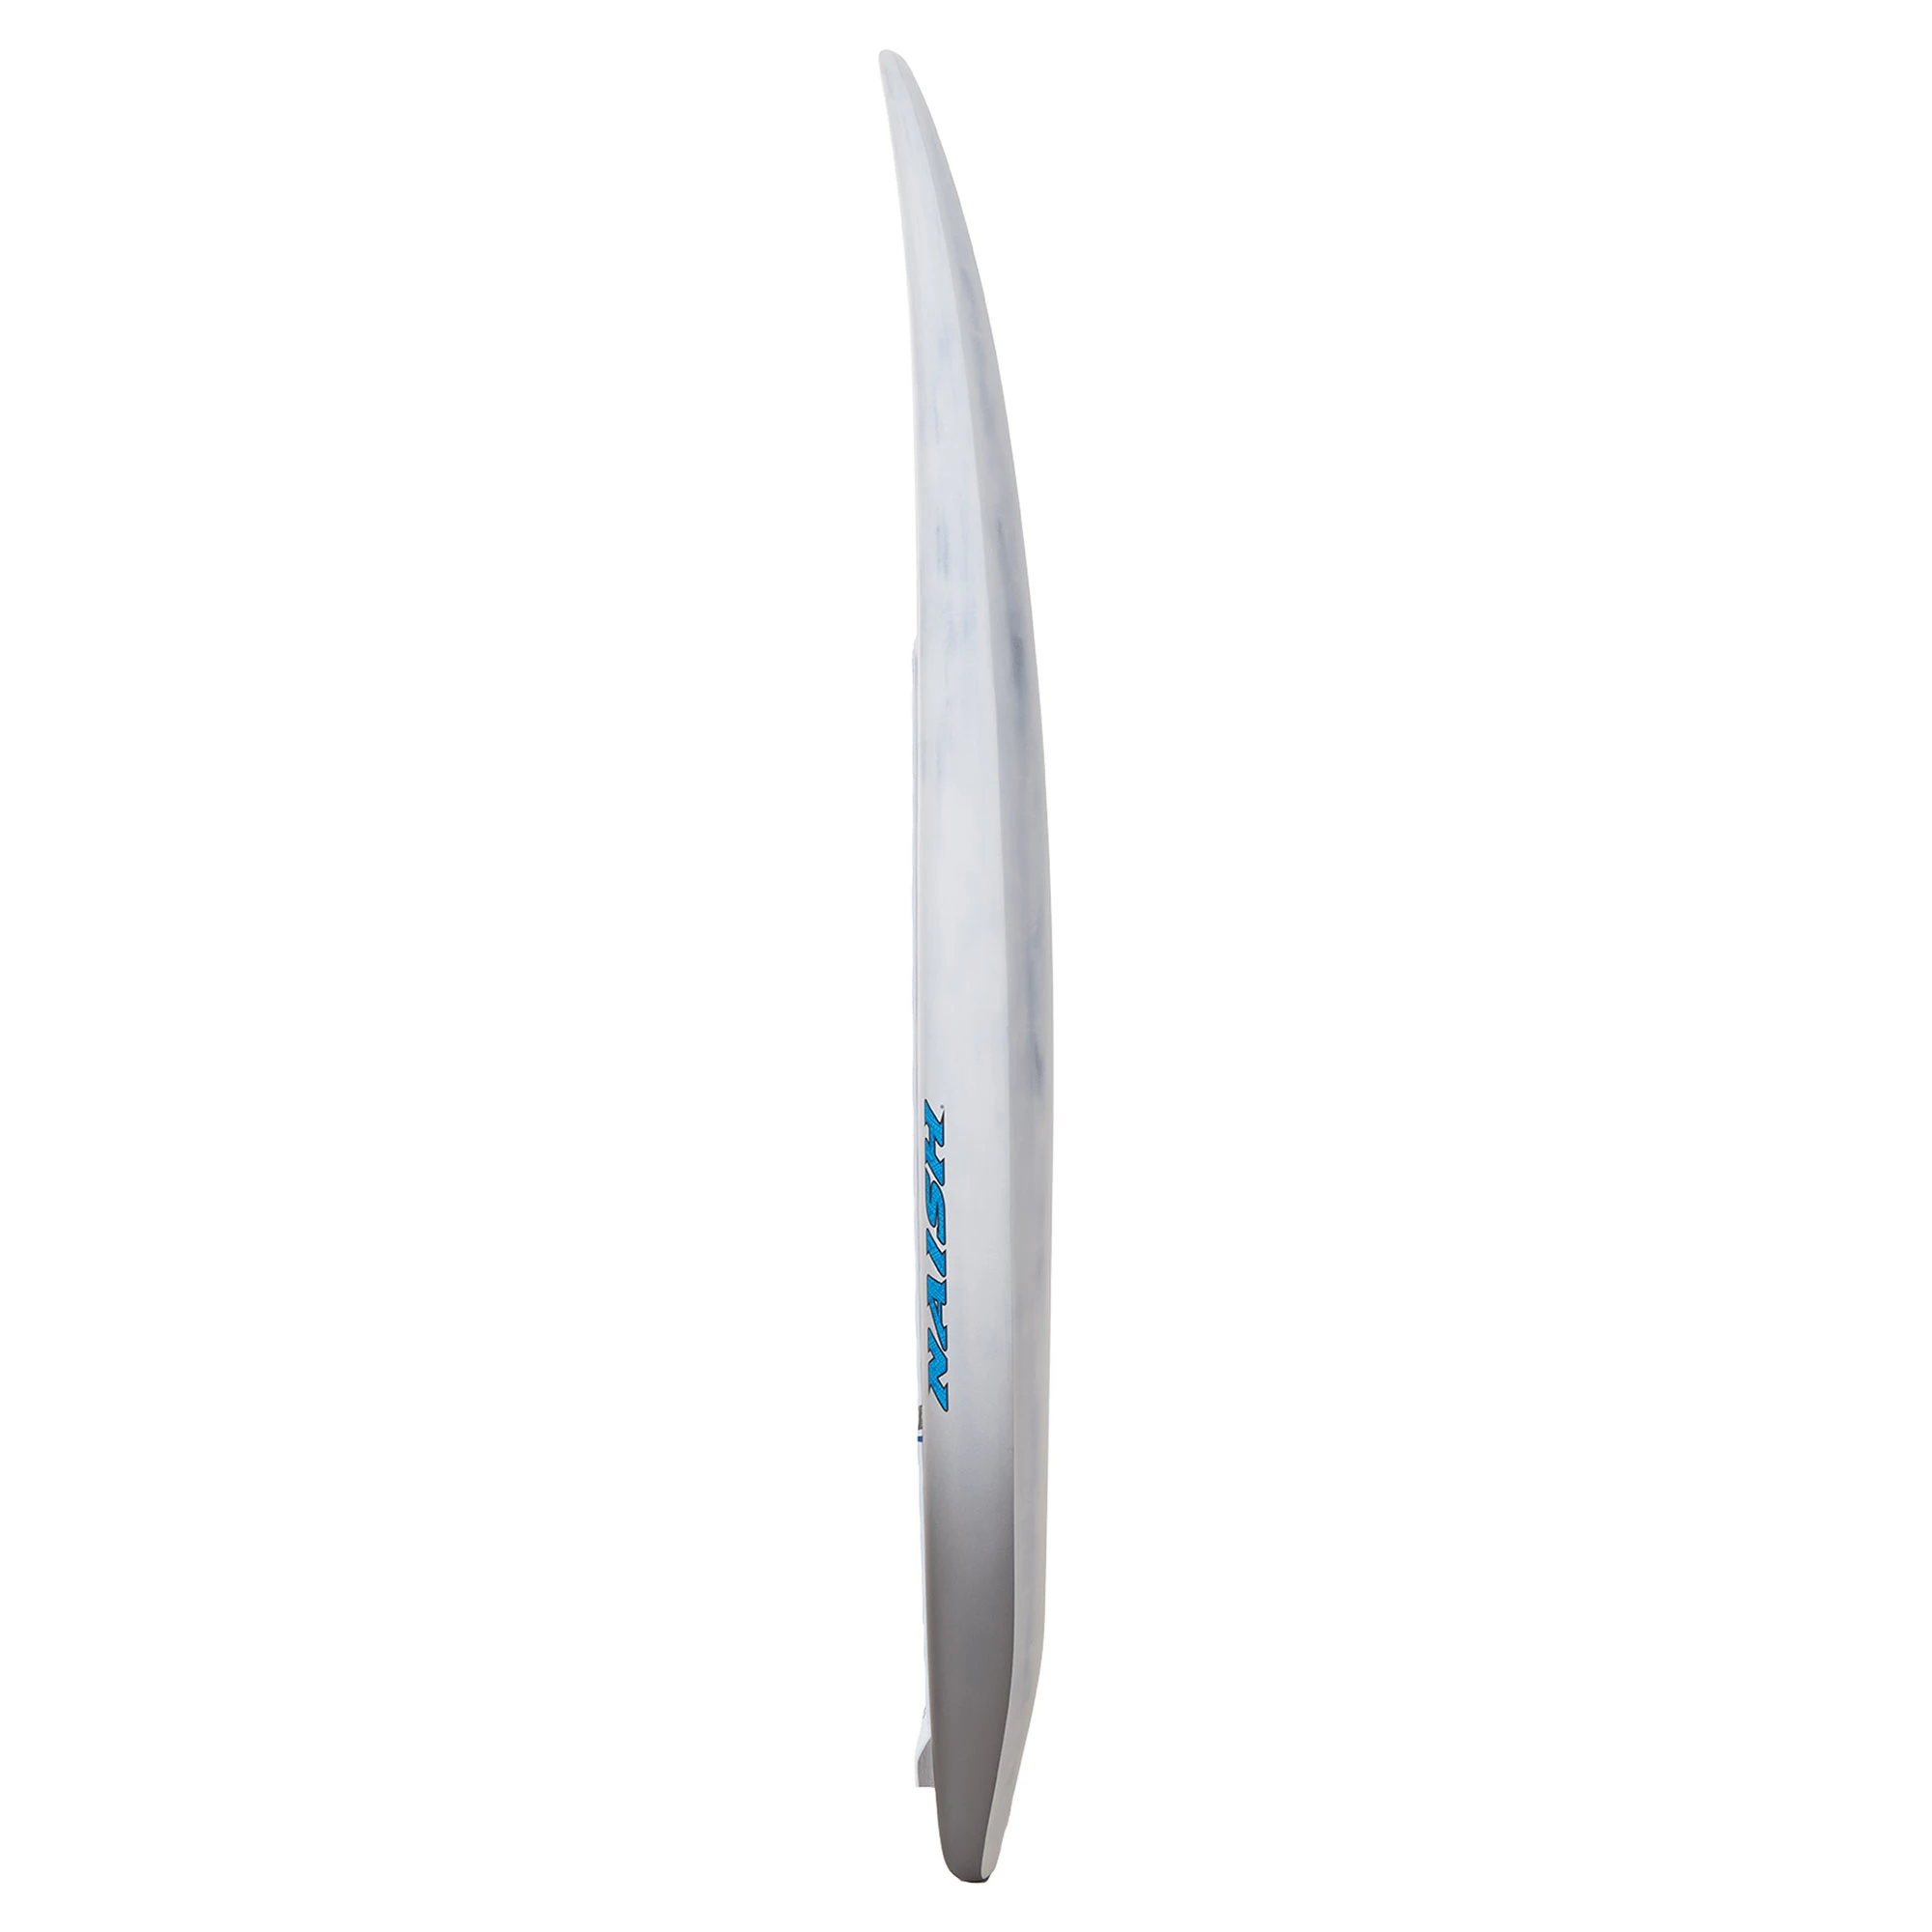 0690244_naish-s26-hover-wing-foil-carbon-ultra-75-bb-75